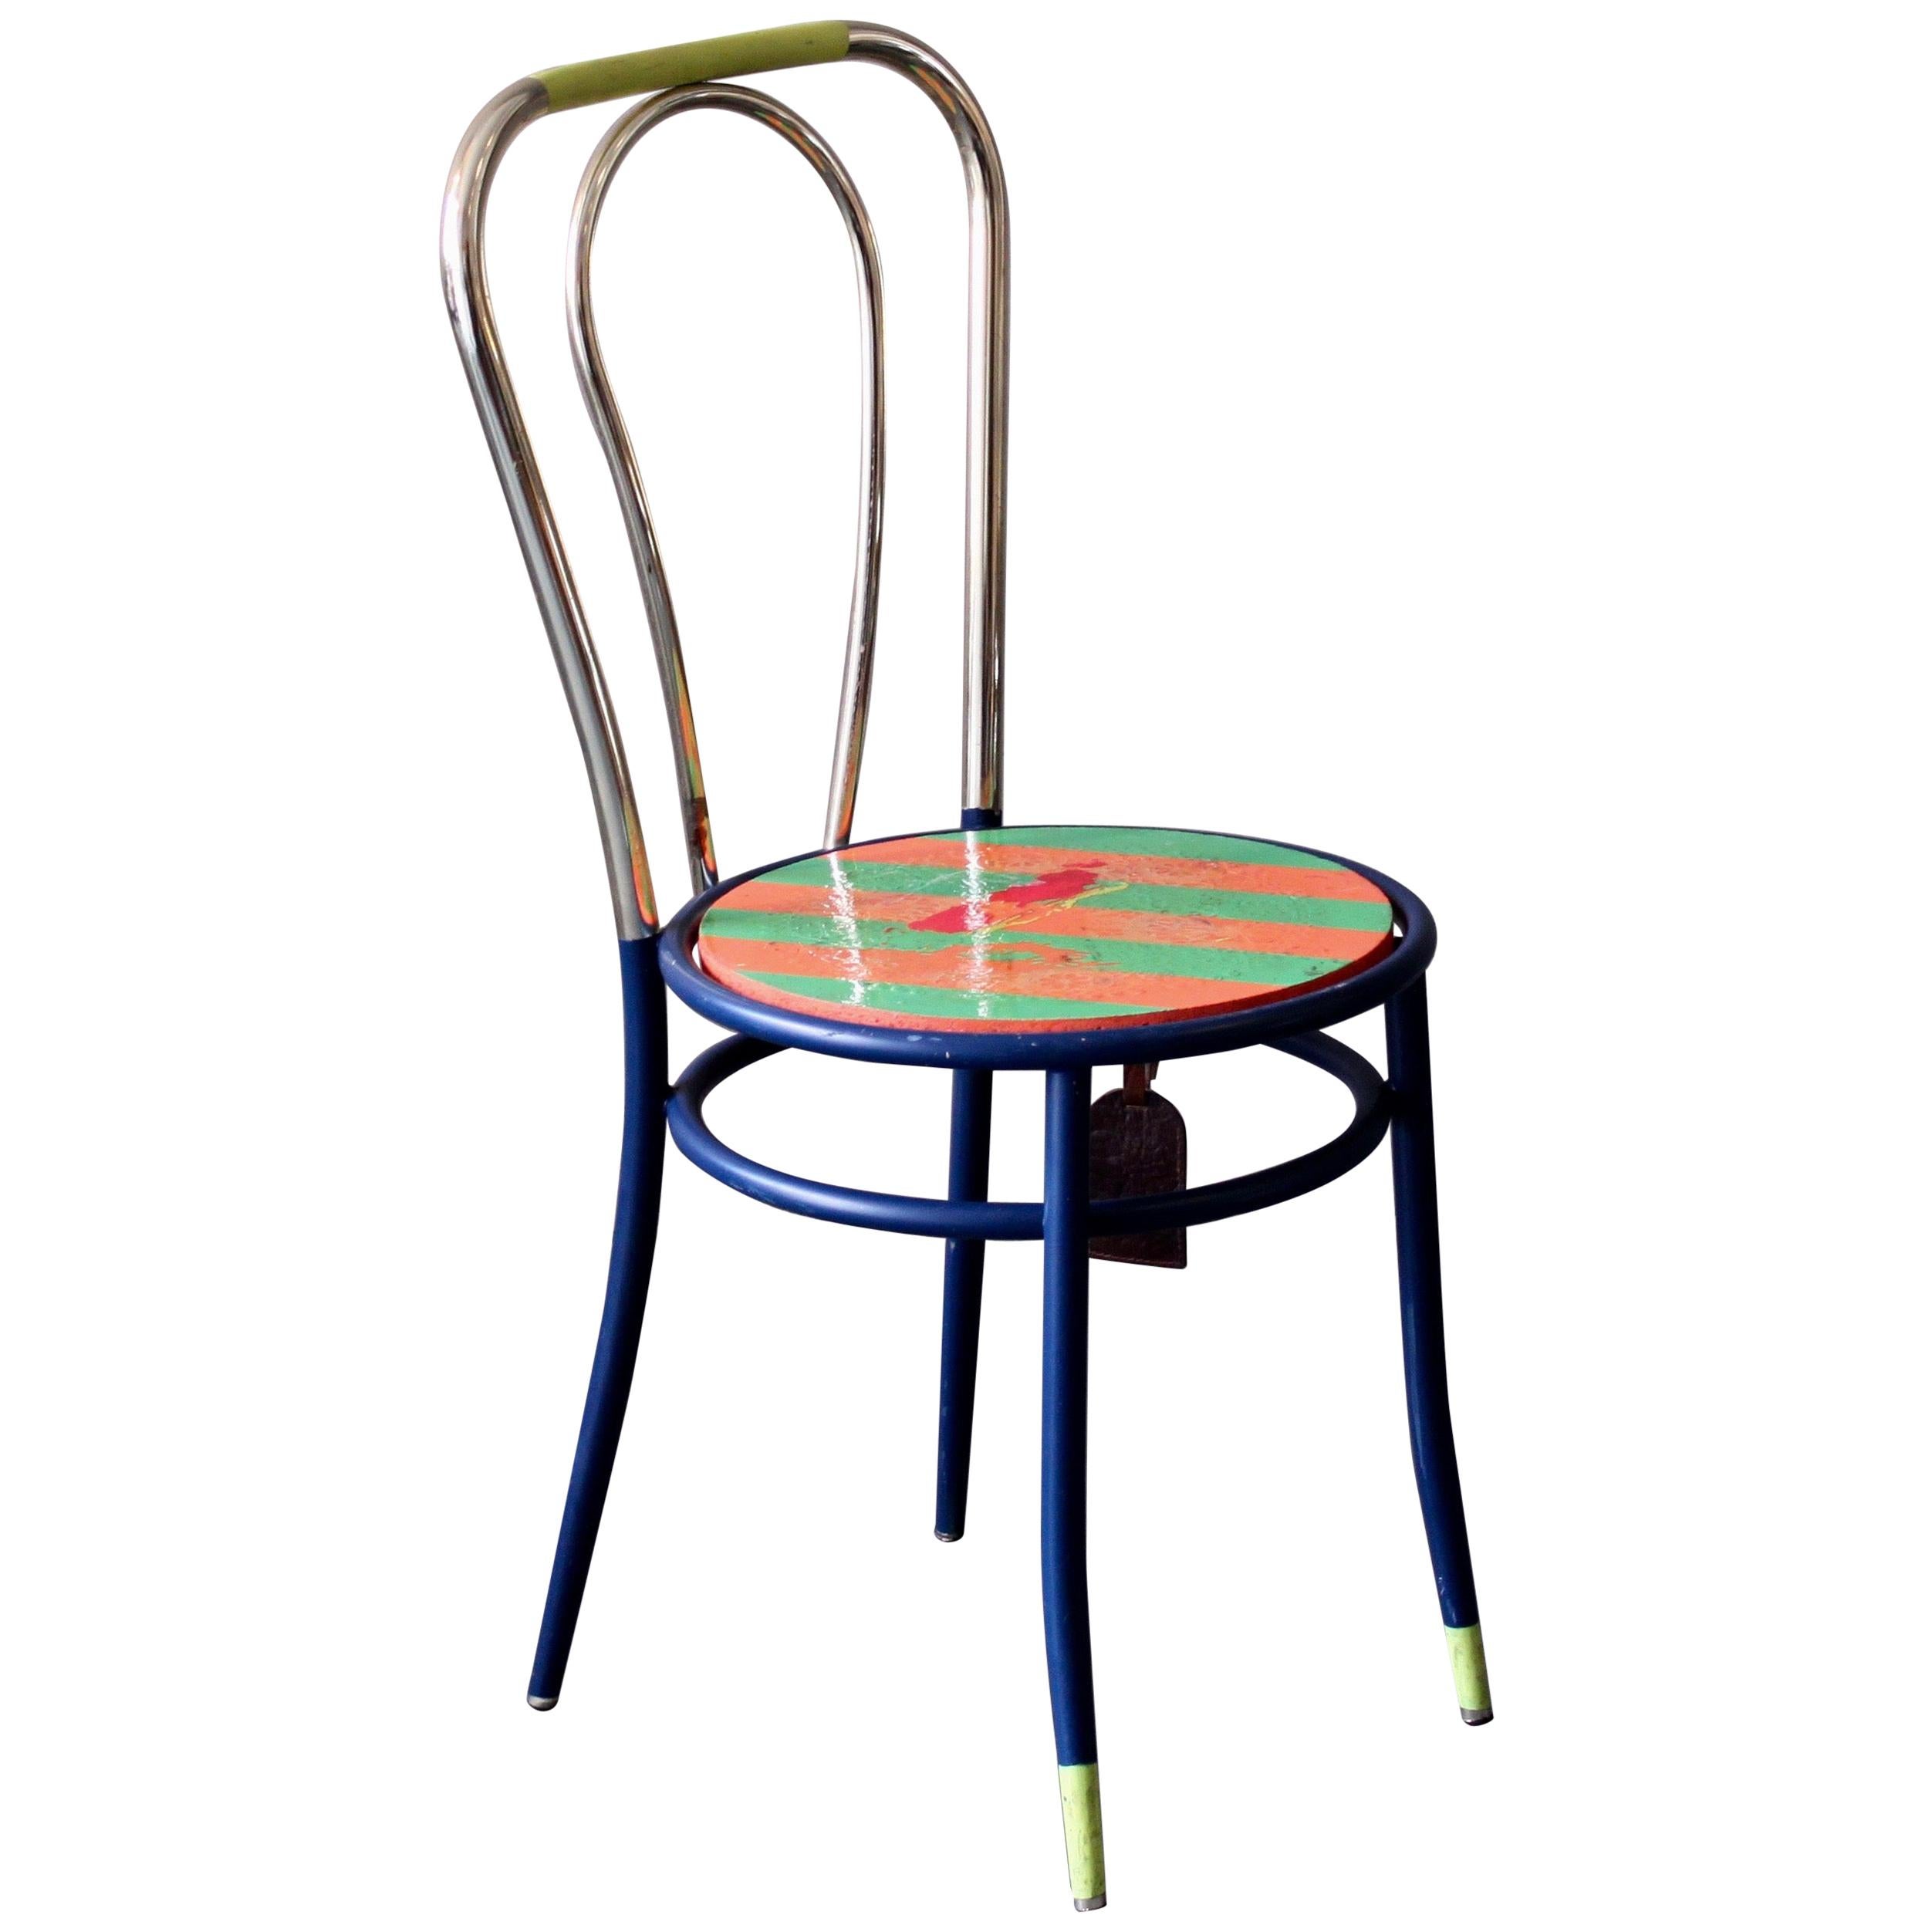 Porno Chic, Thonet Chair in Metal Contemporized by Markus Friedrich Staab For Sale